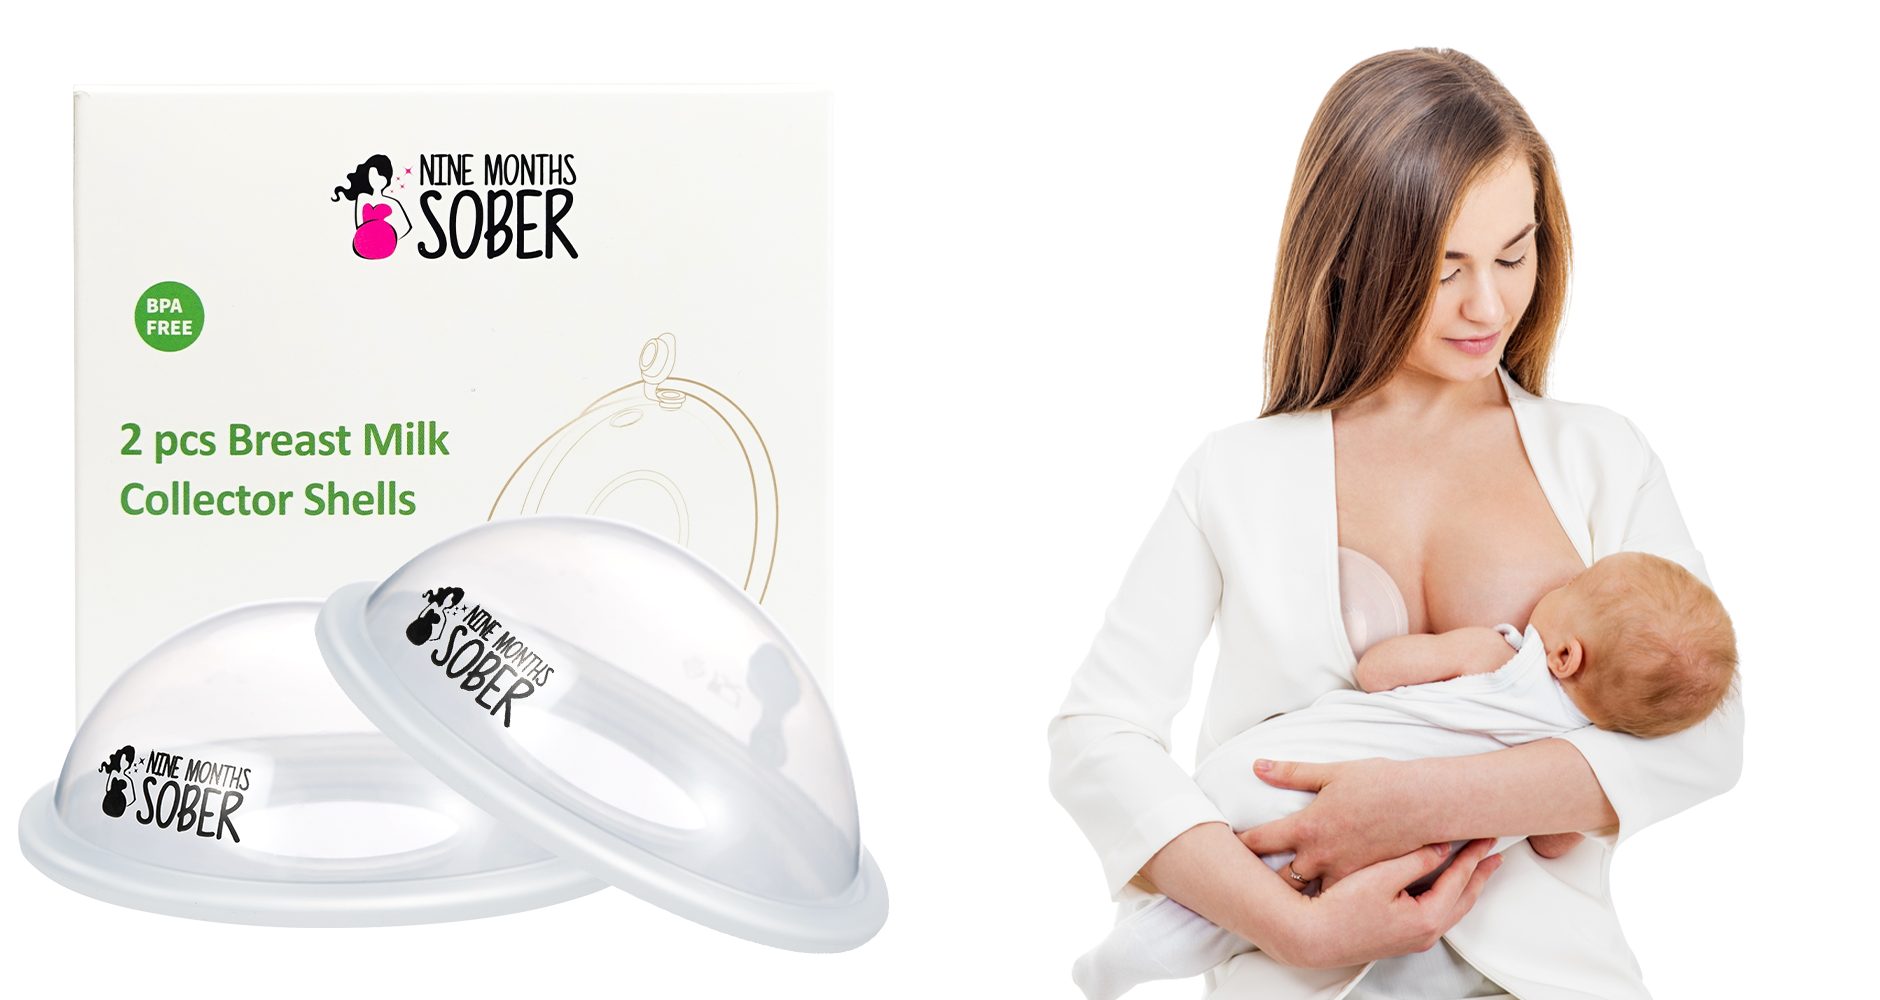 Breast Milk Stains? This Clever Product will Solve your Problem